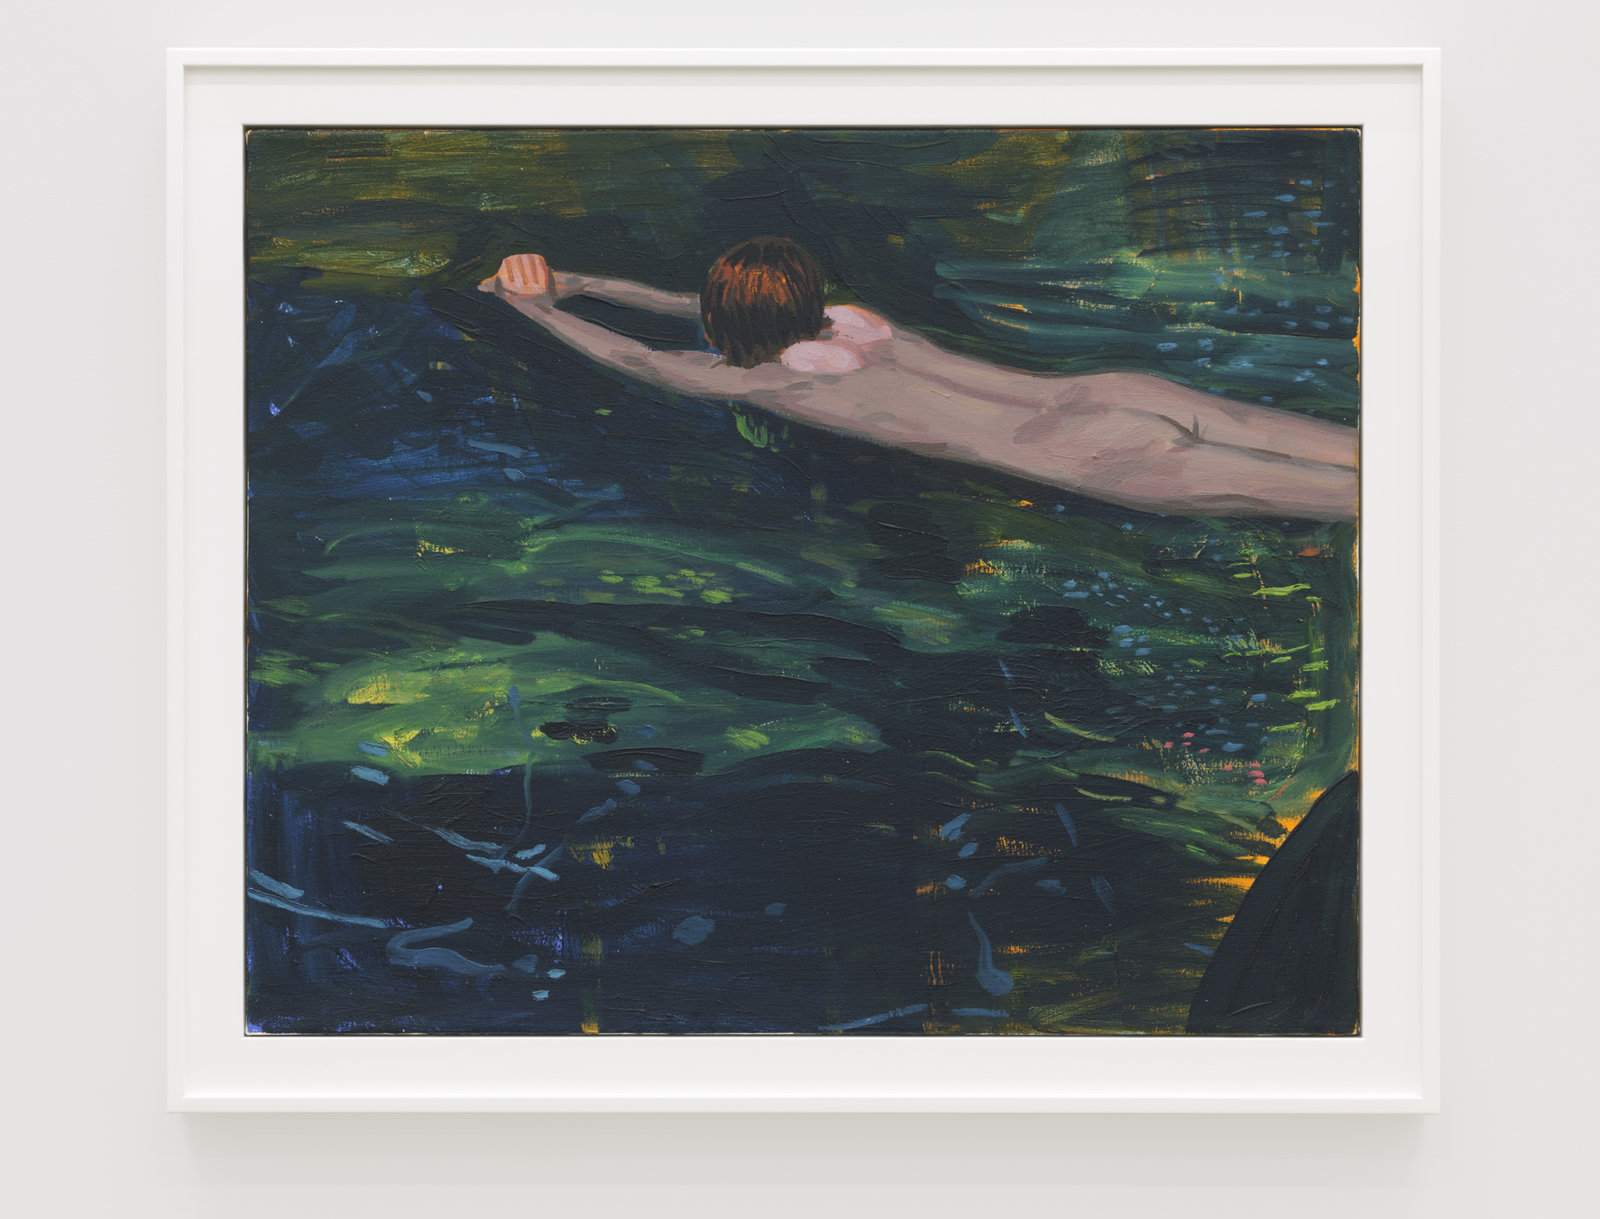 Damian Moppett, Untitled (Green Swimming), 2020, oil on canvas, 27 x 32 in. (69 x 82 cm)